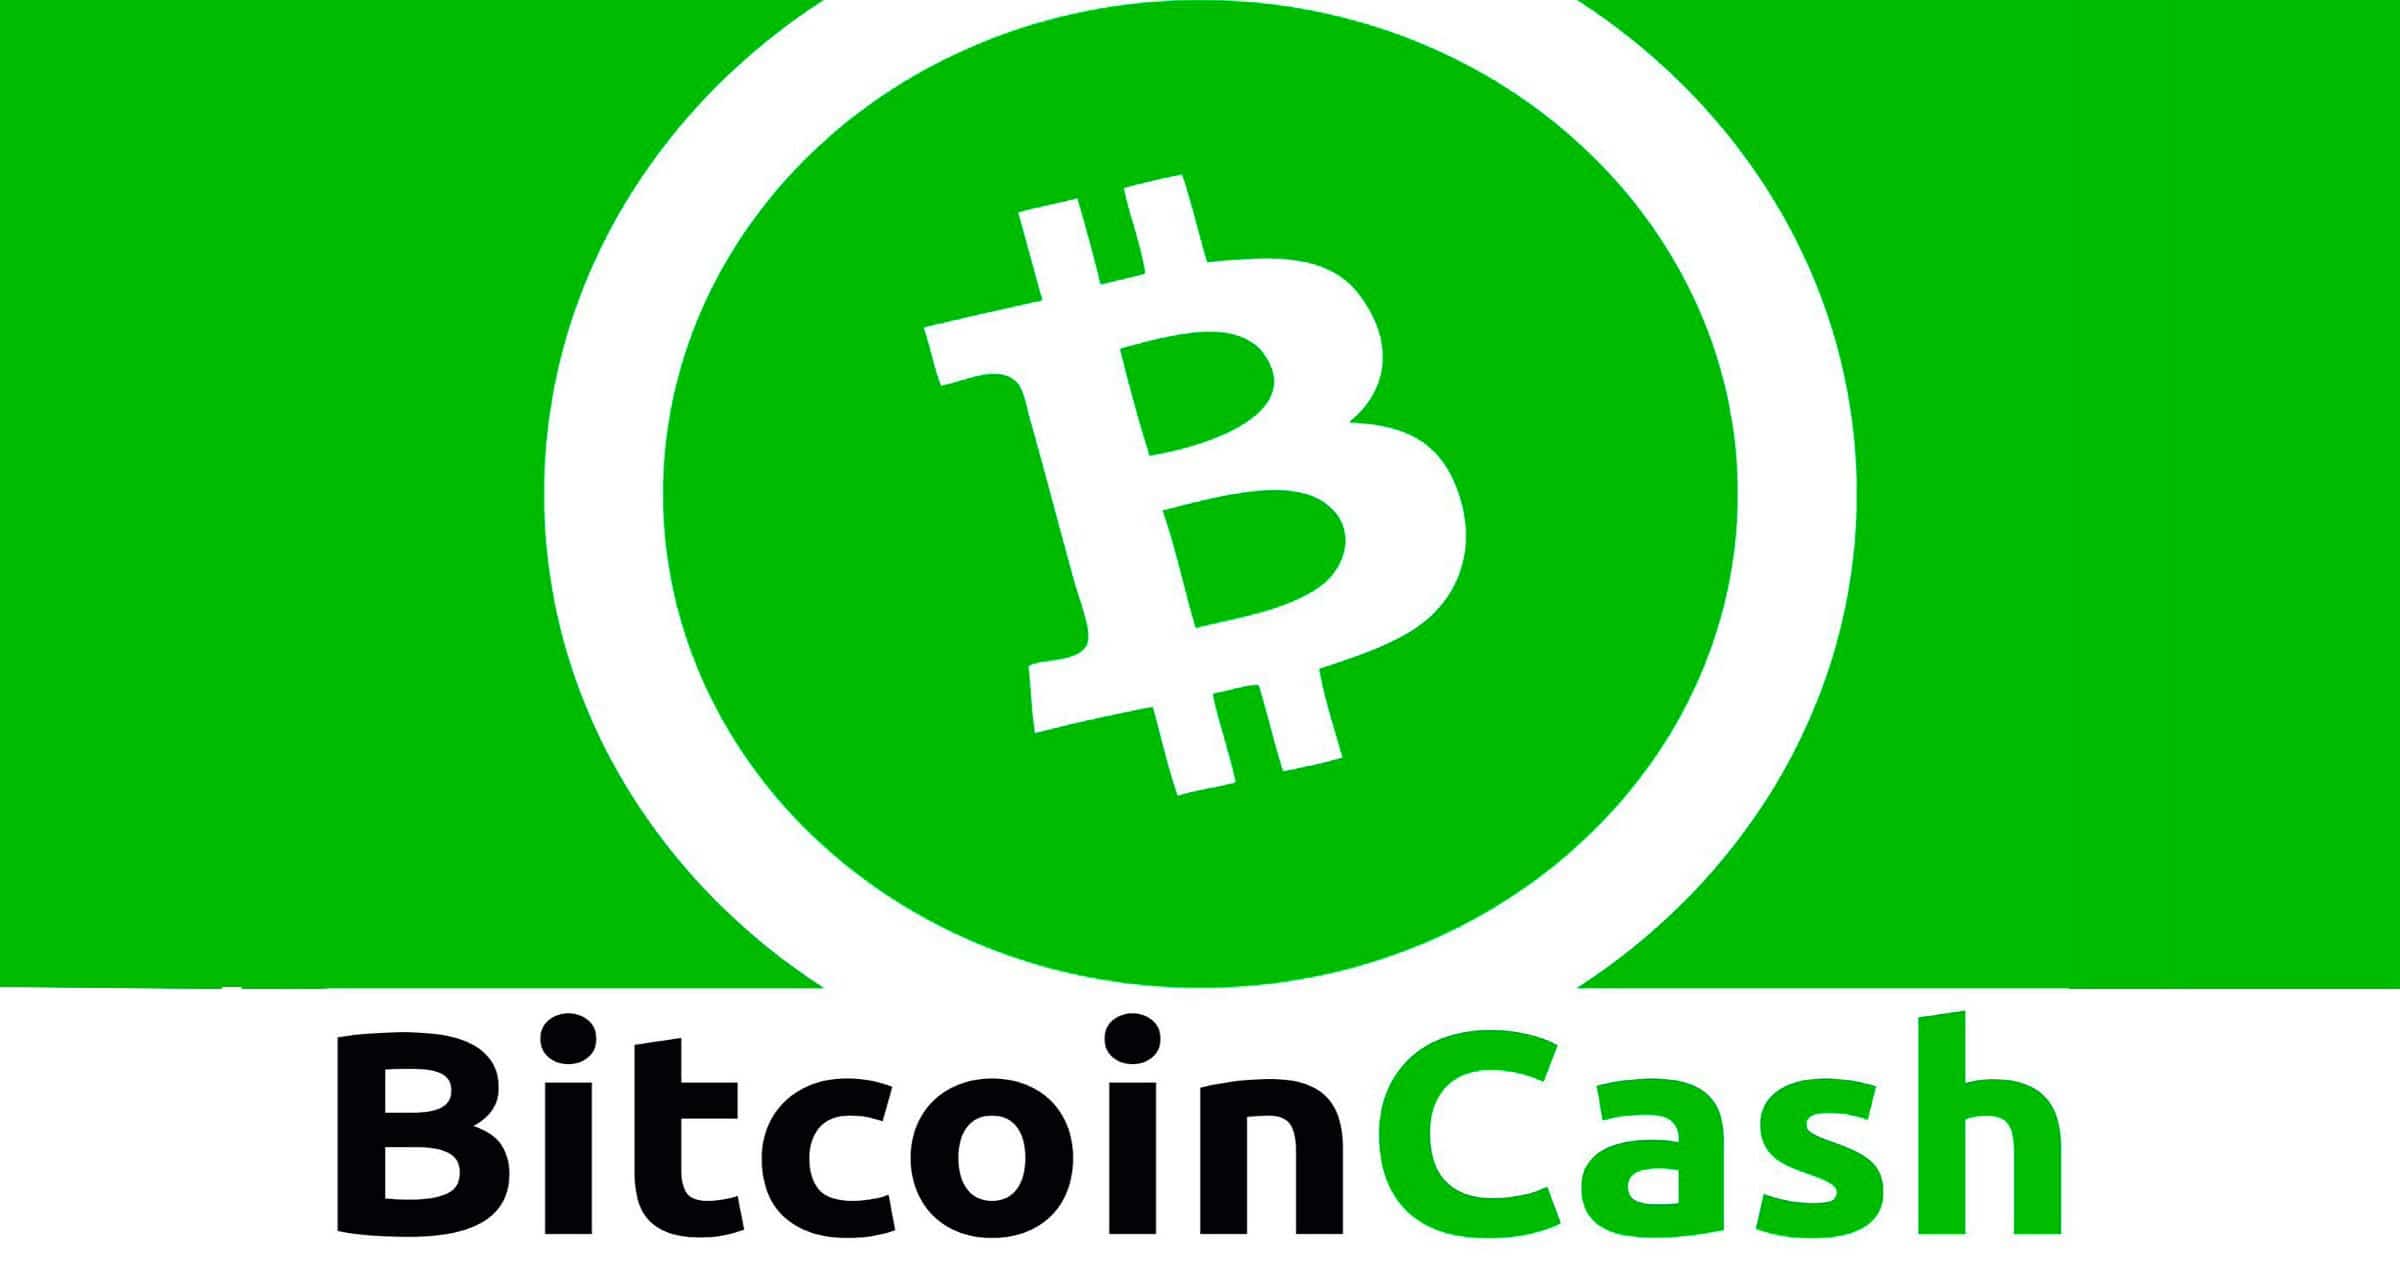 An unknown miner controlled the Bitcoin Cash network for more than 24 hours